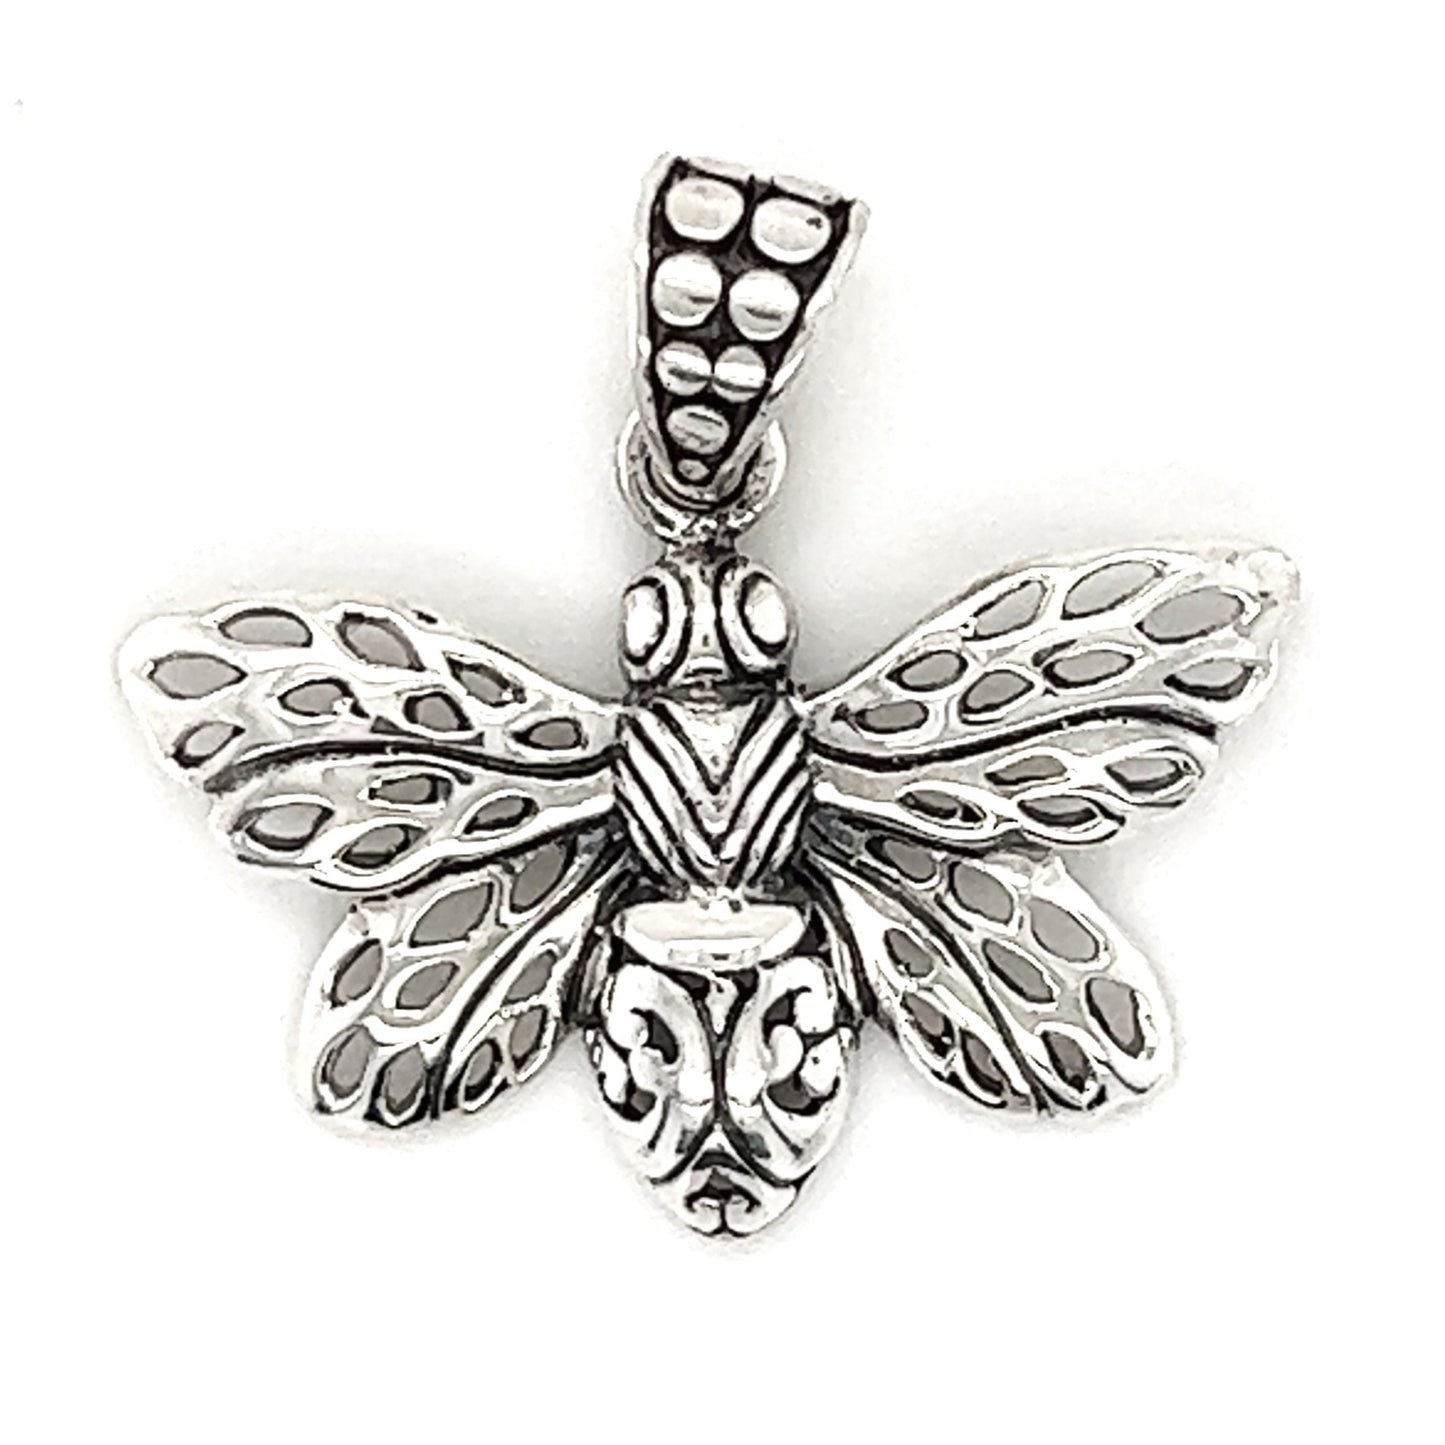 Discover this exquisite Bee Pendant, featuring intricate detailing on its wings and body, a true gem from our Artisan Collections.